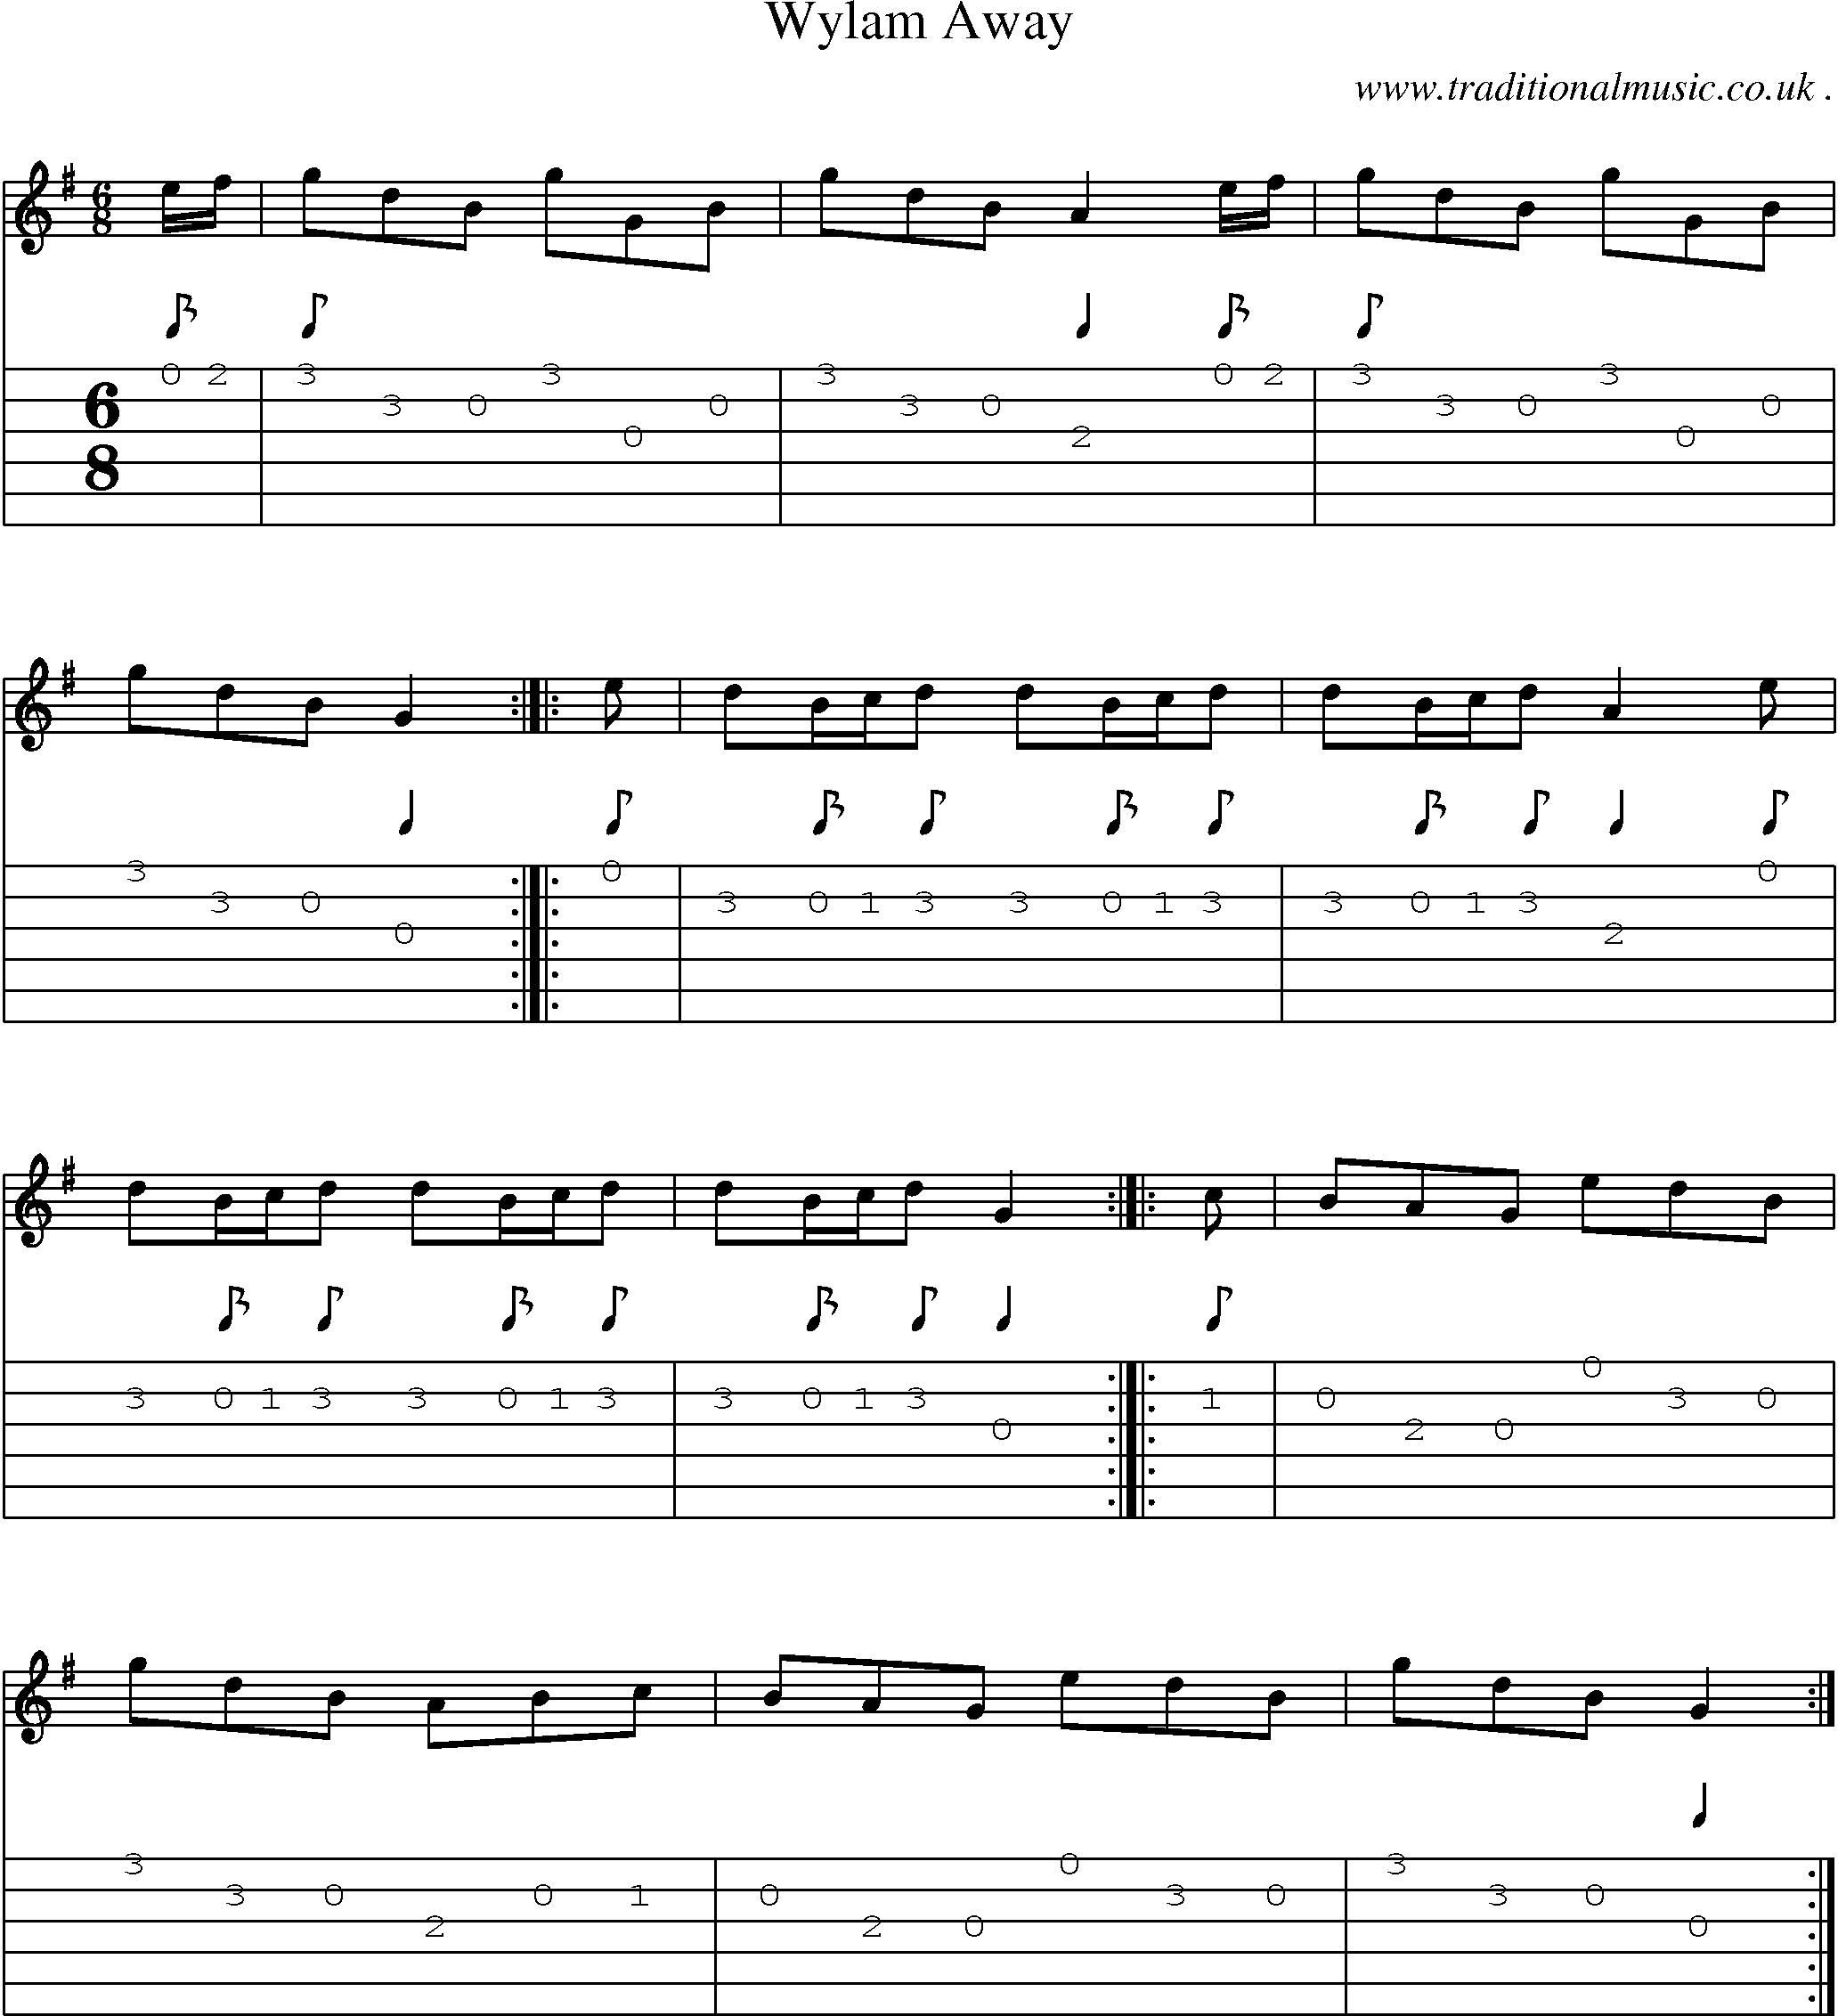 Sheet-Music and Guitar Tabs for Wylam Away